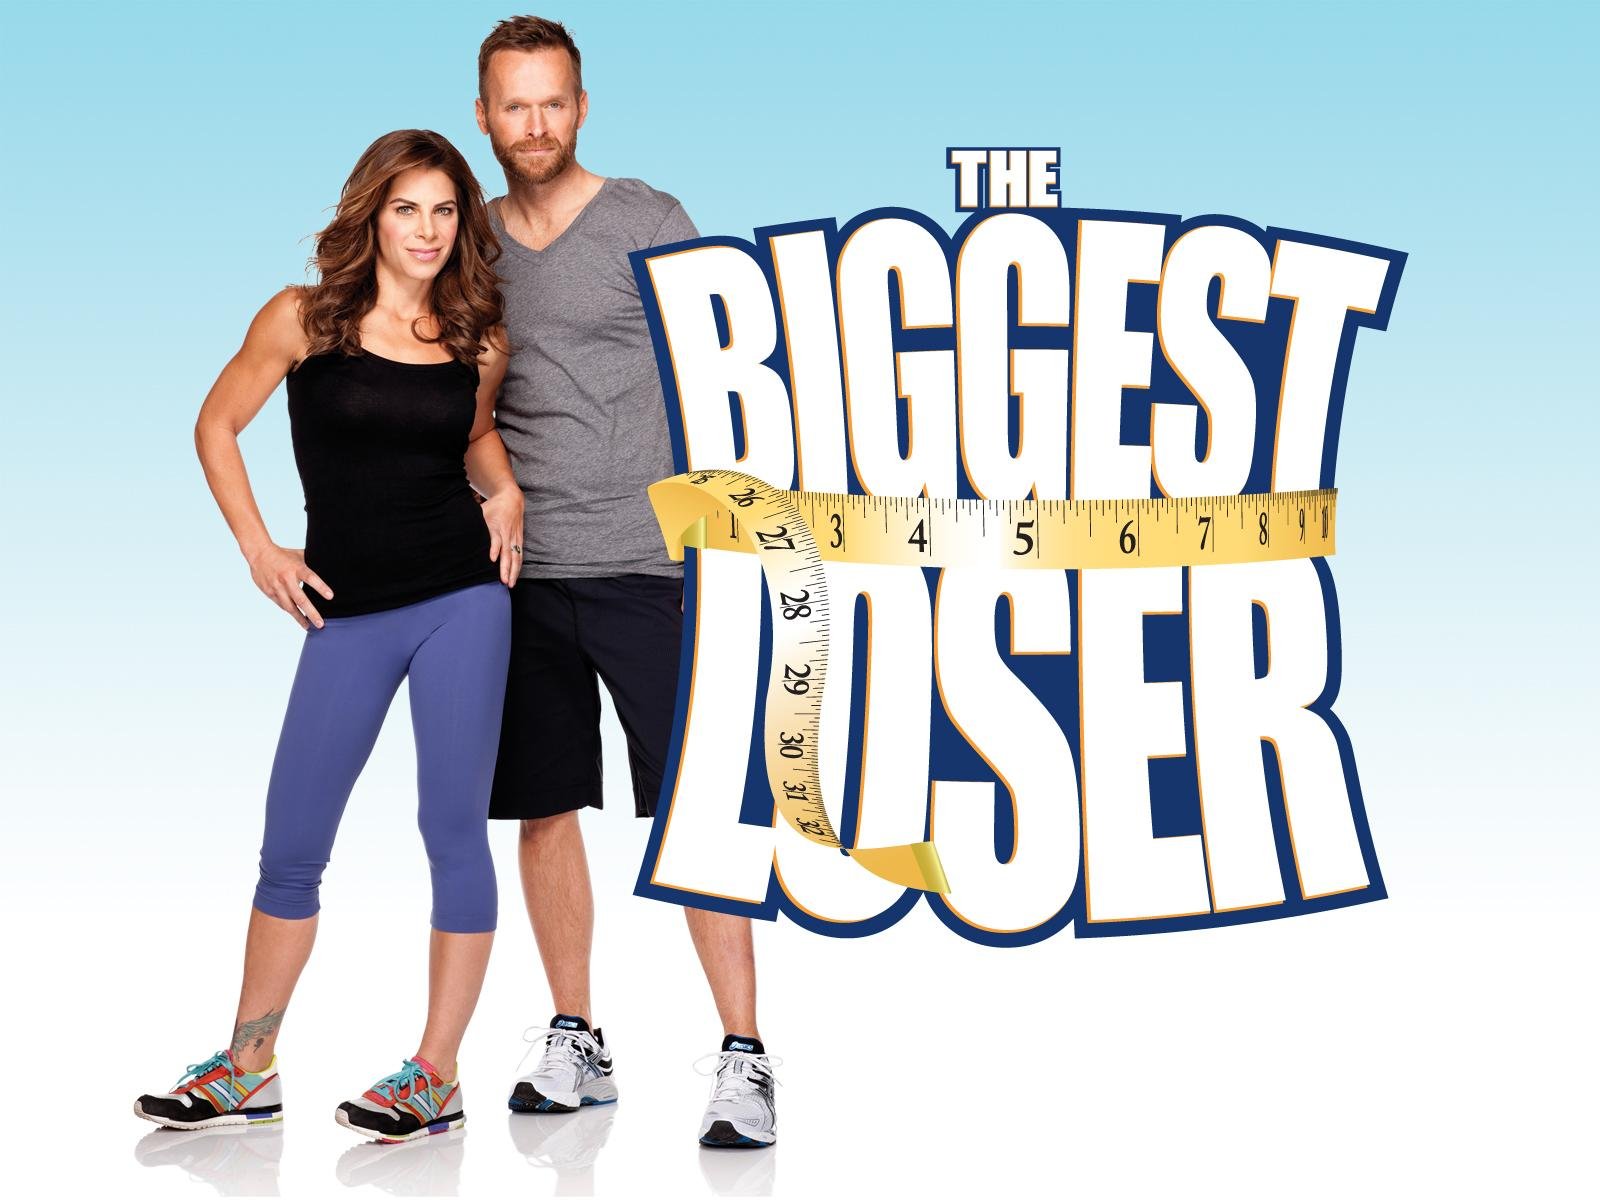 Where To Watch Biggest Loser Uk Remember The Biggest Loser? This Is What The Most Memorable Contestants Look Like Now